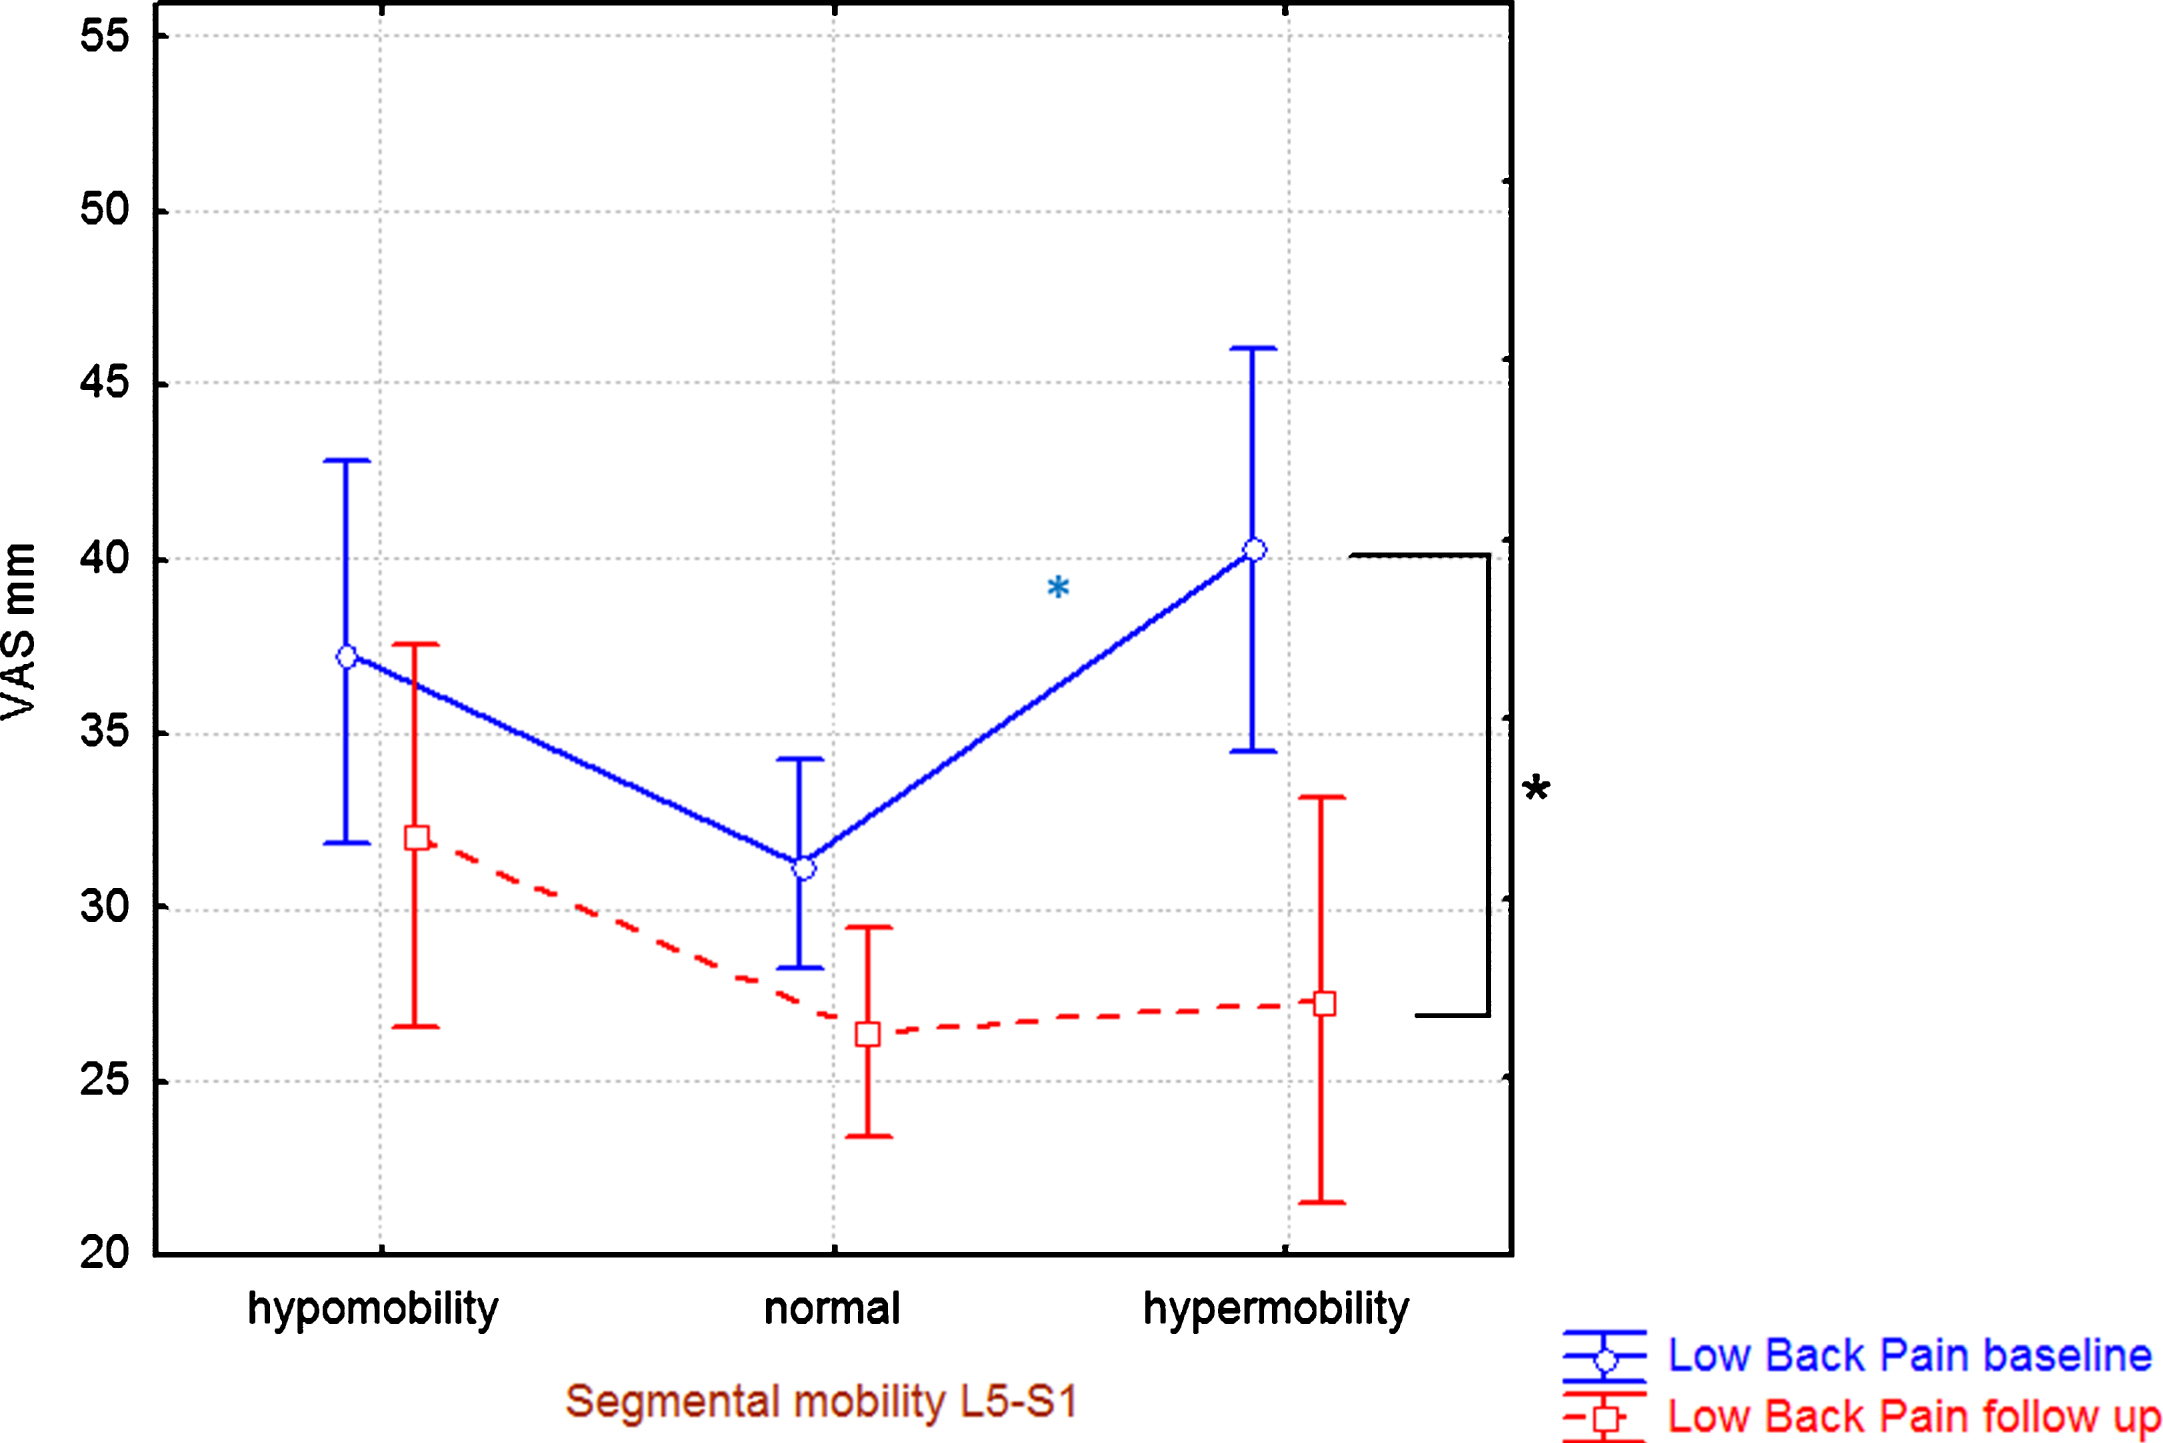 Segmental mobility at L5-S1 at the clinical assessment at baseline versus low back pain intensity (mean ± 95% CI) at baseline and at eight-year follow-up eight. *denotes significant difference in relation to normal segmental mobility and significant difference between baseline and follow-up, respectively.